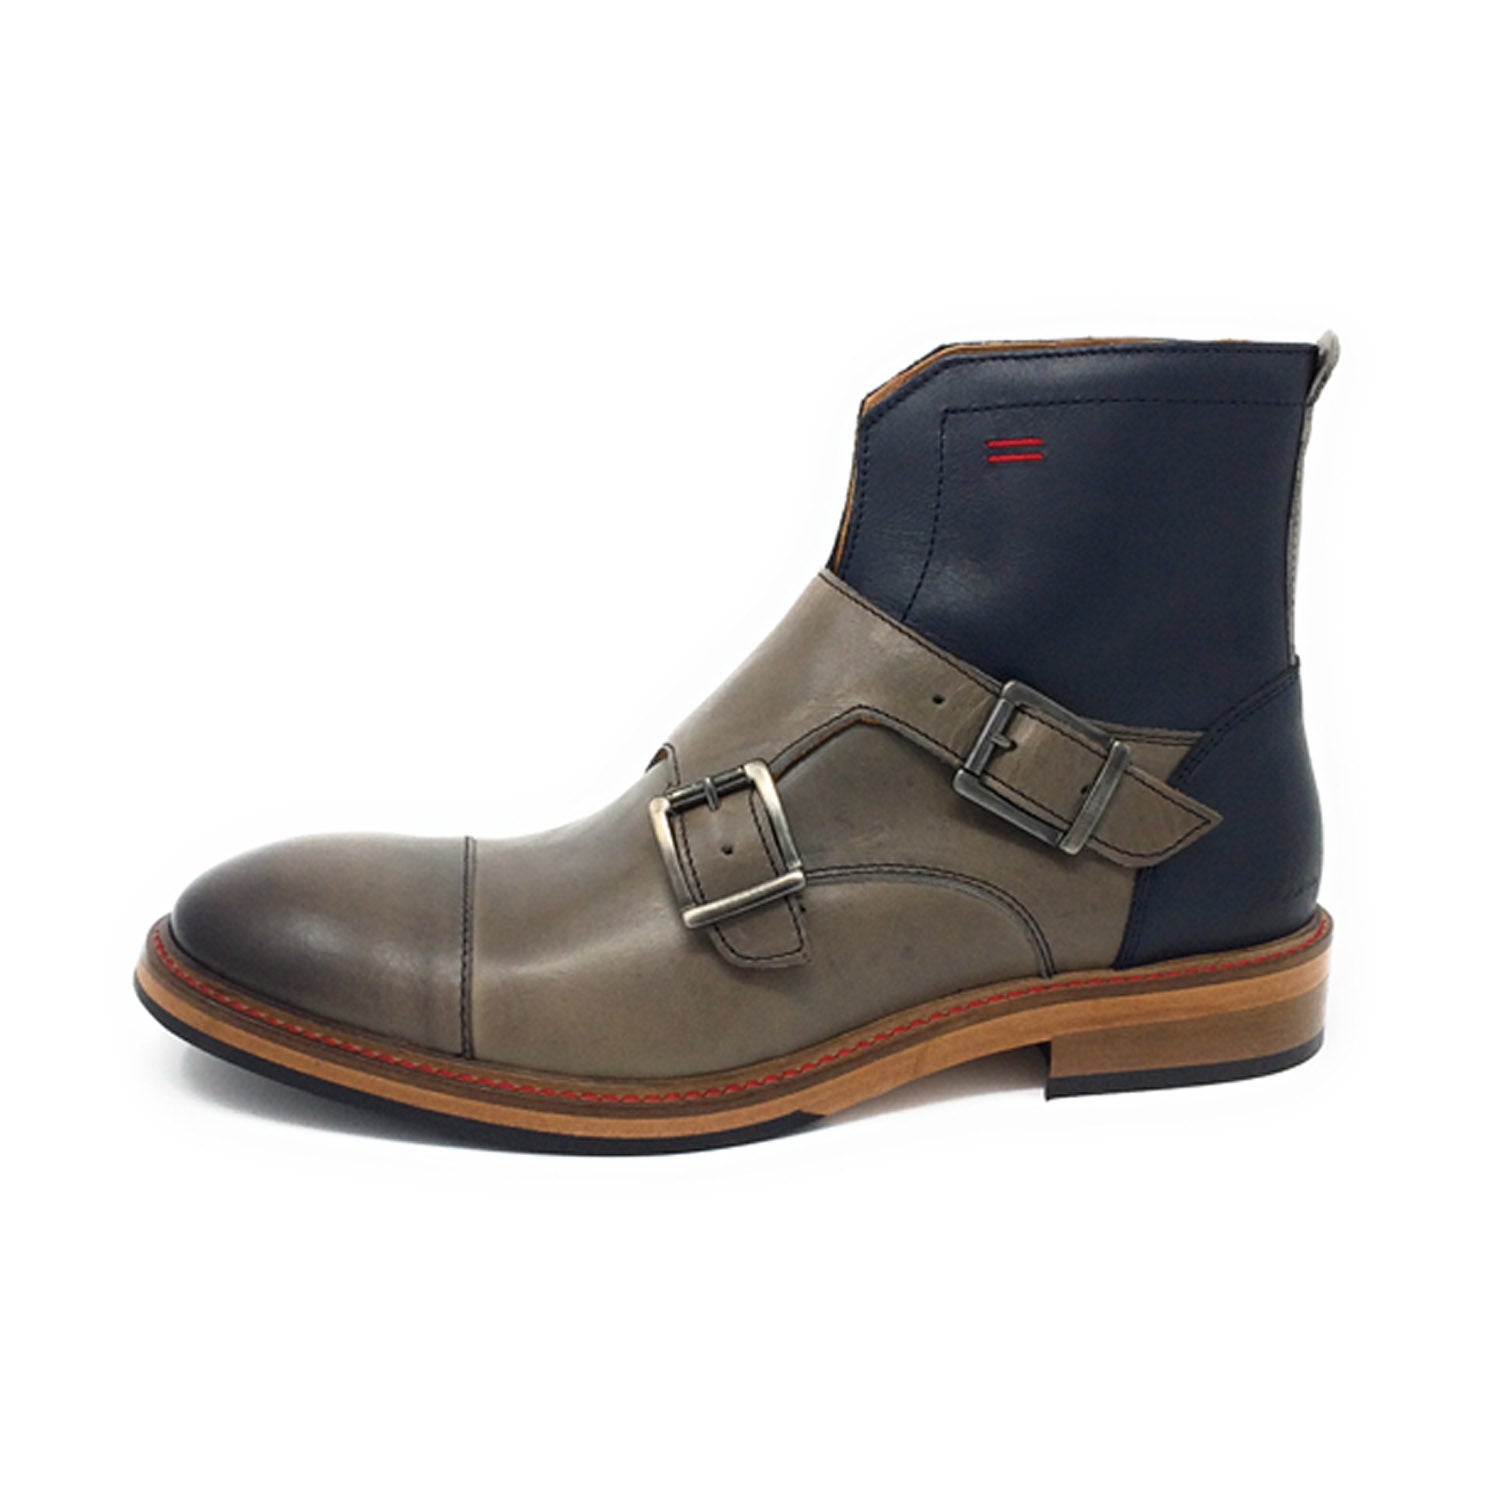 The Limited-Edition Monk Boot (5 color options) - NiK Kacy